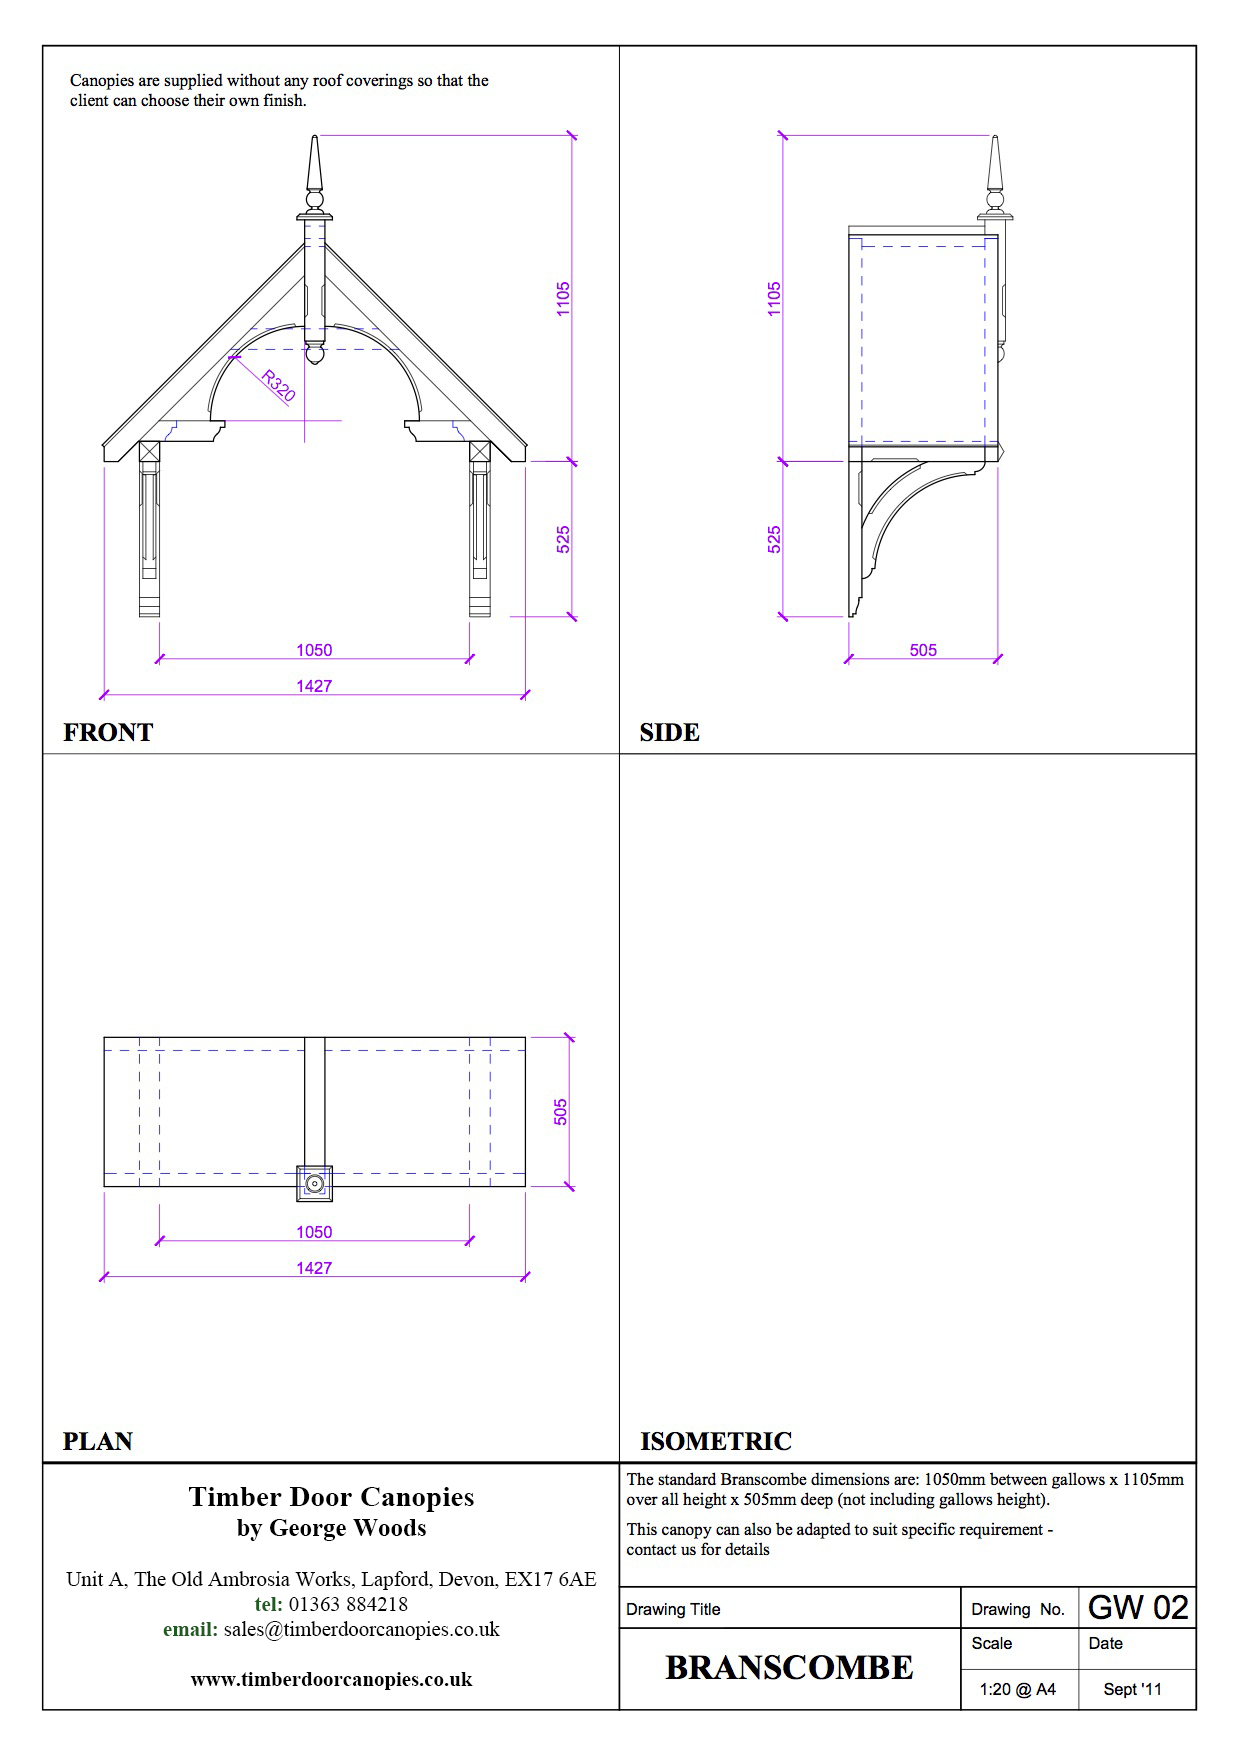 Chilcombe canopy CAD drawings